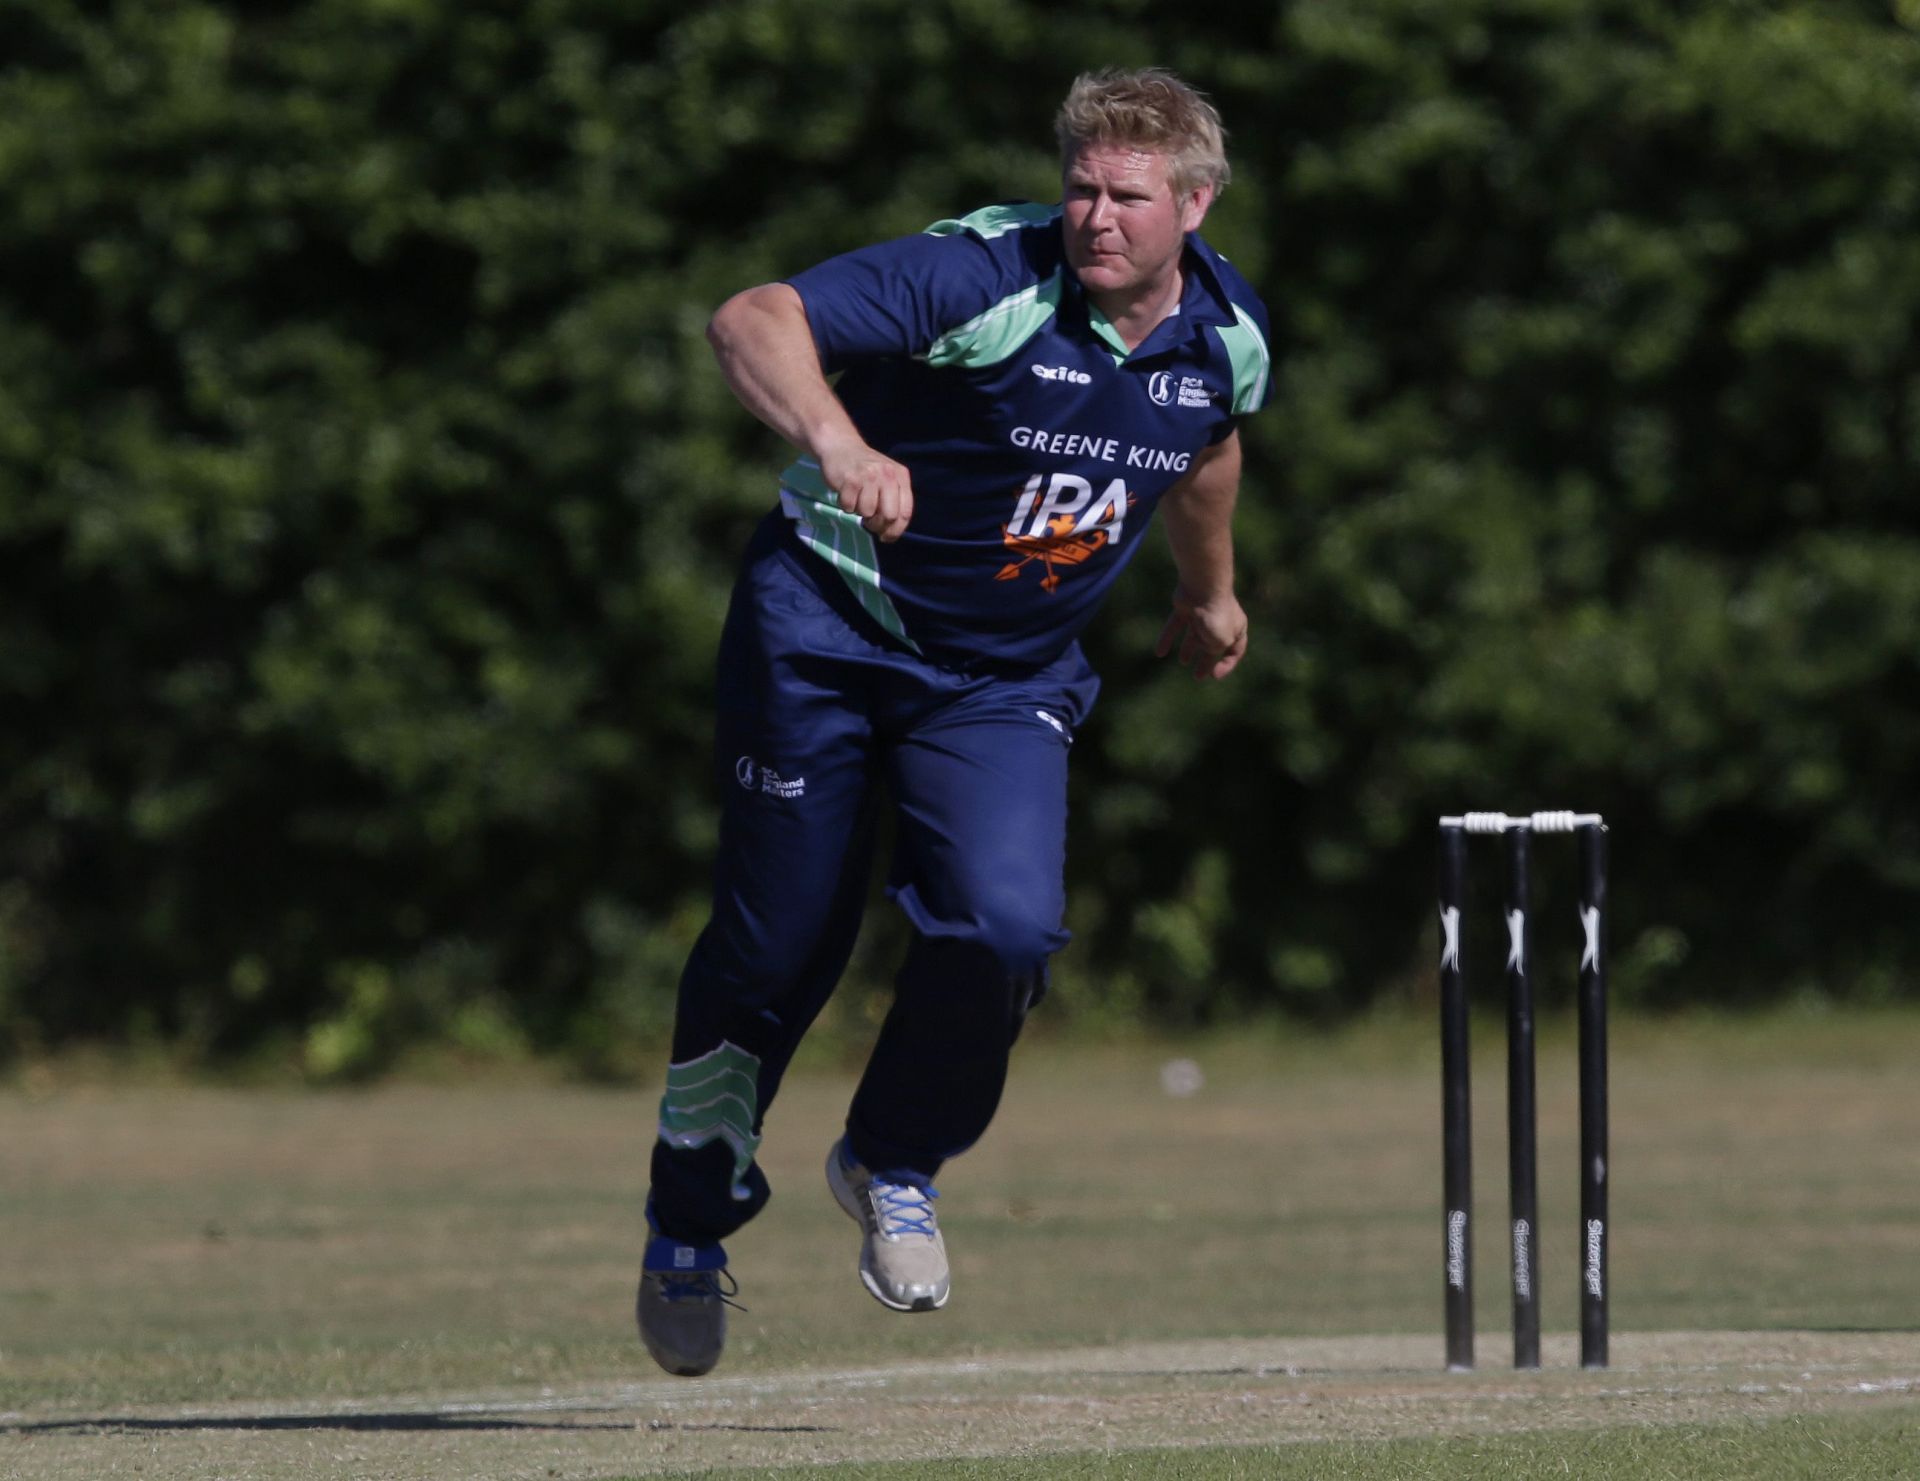 Former England fast bowler Matthew Hoggard. Pic: Getty Images